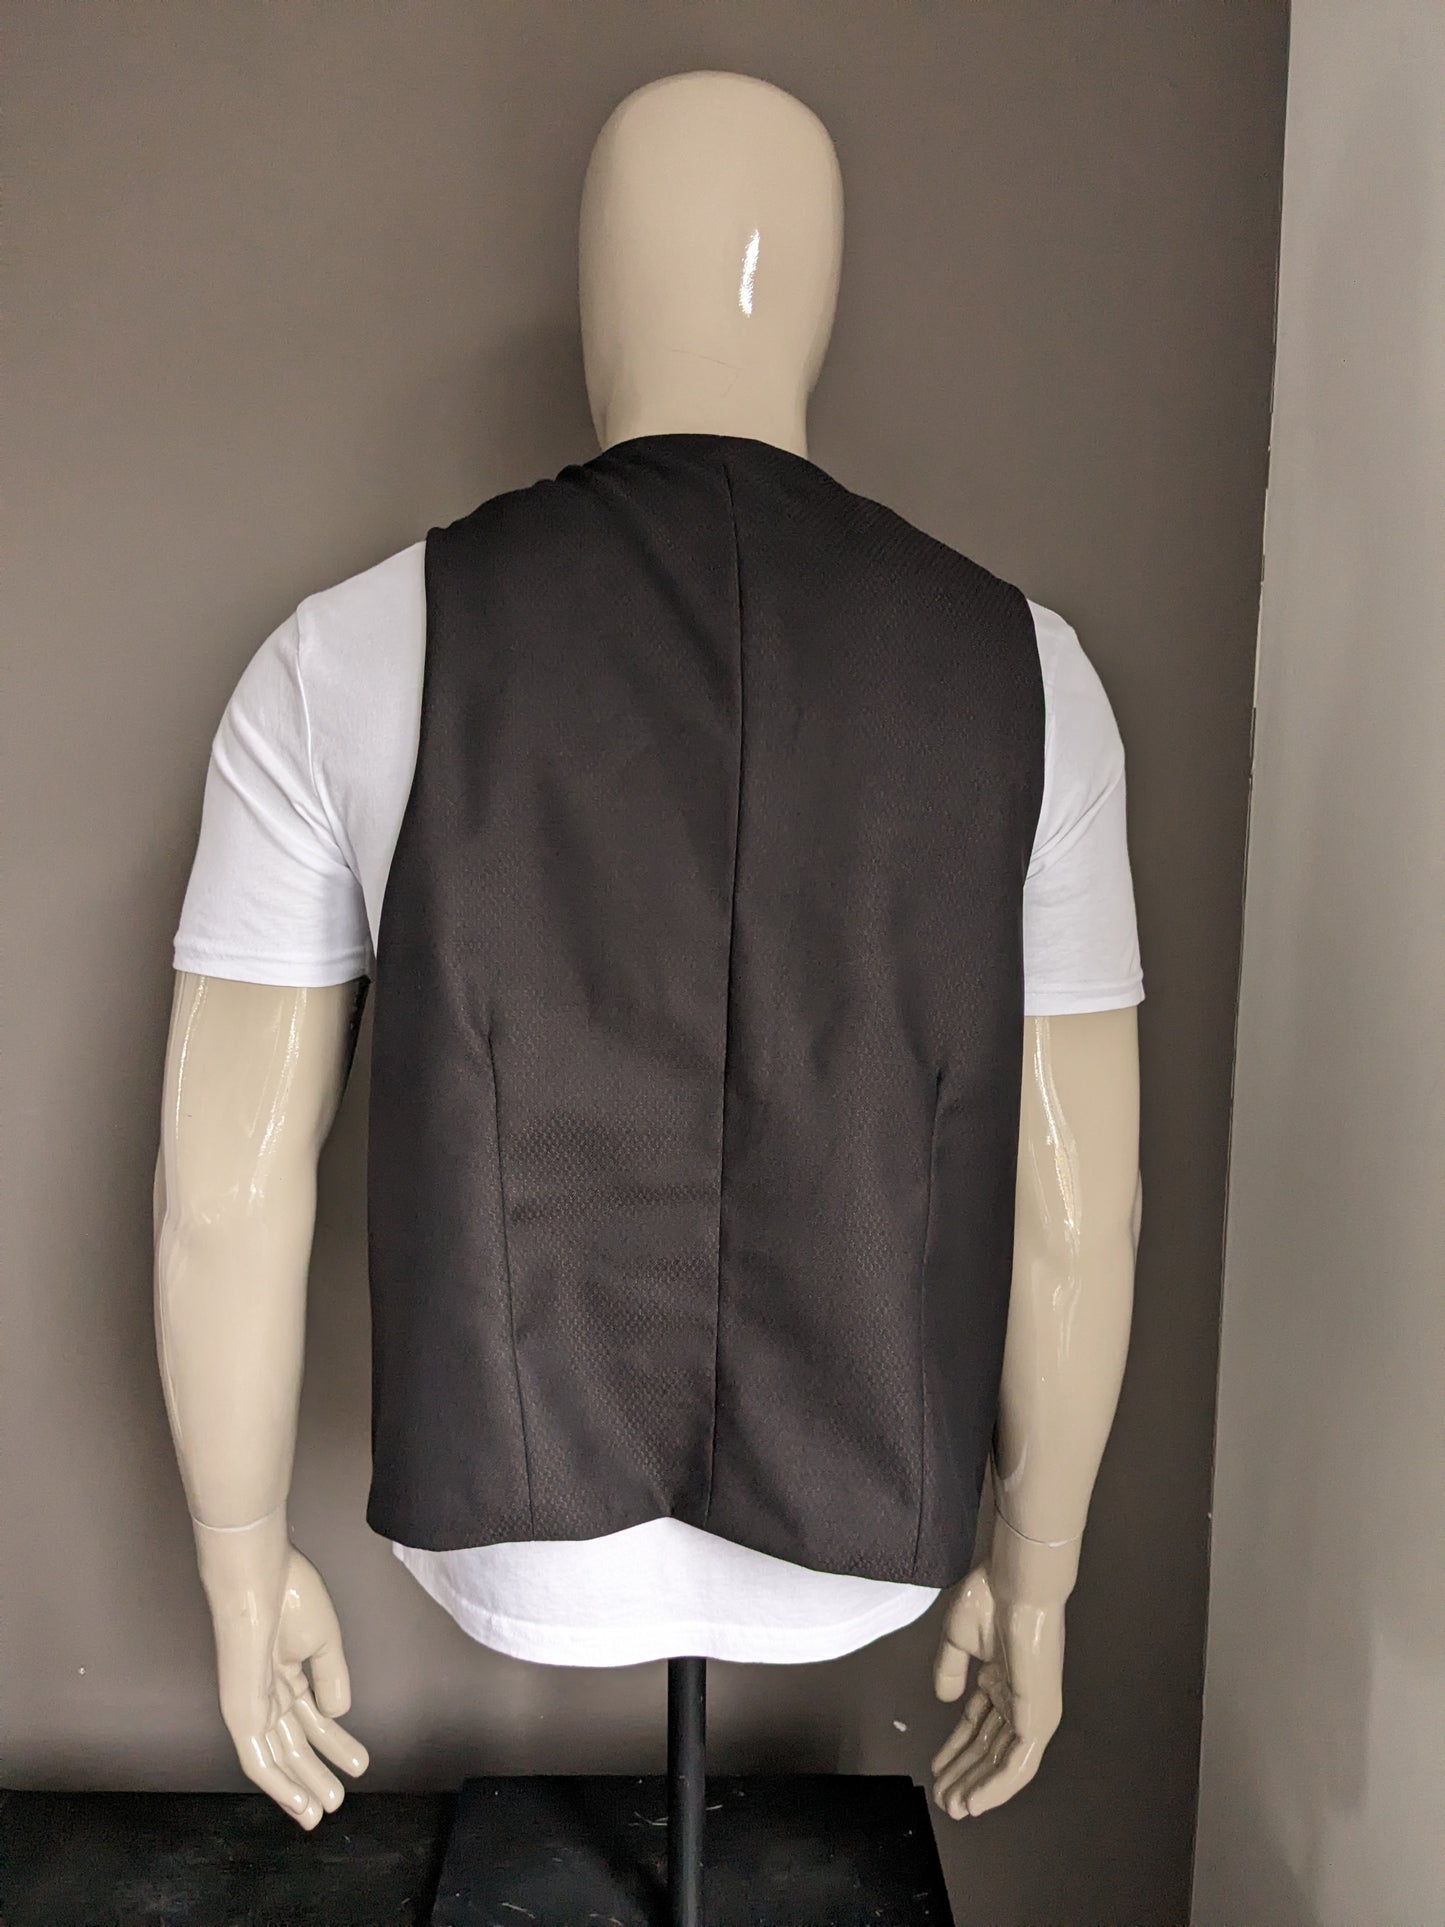 Gilet #340. Brown black motif with small inner pocket. Size XL.